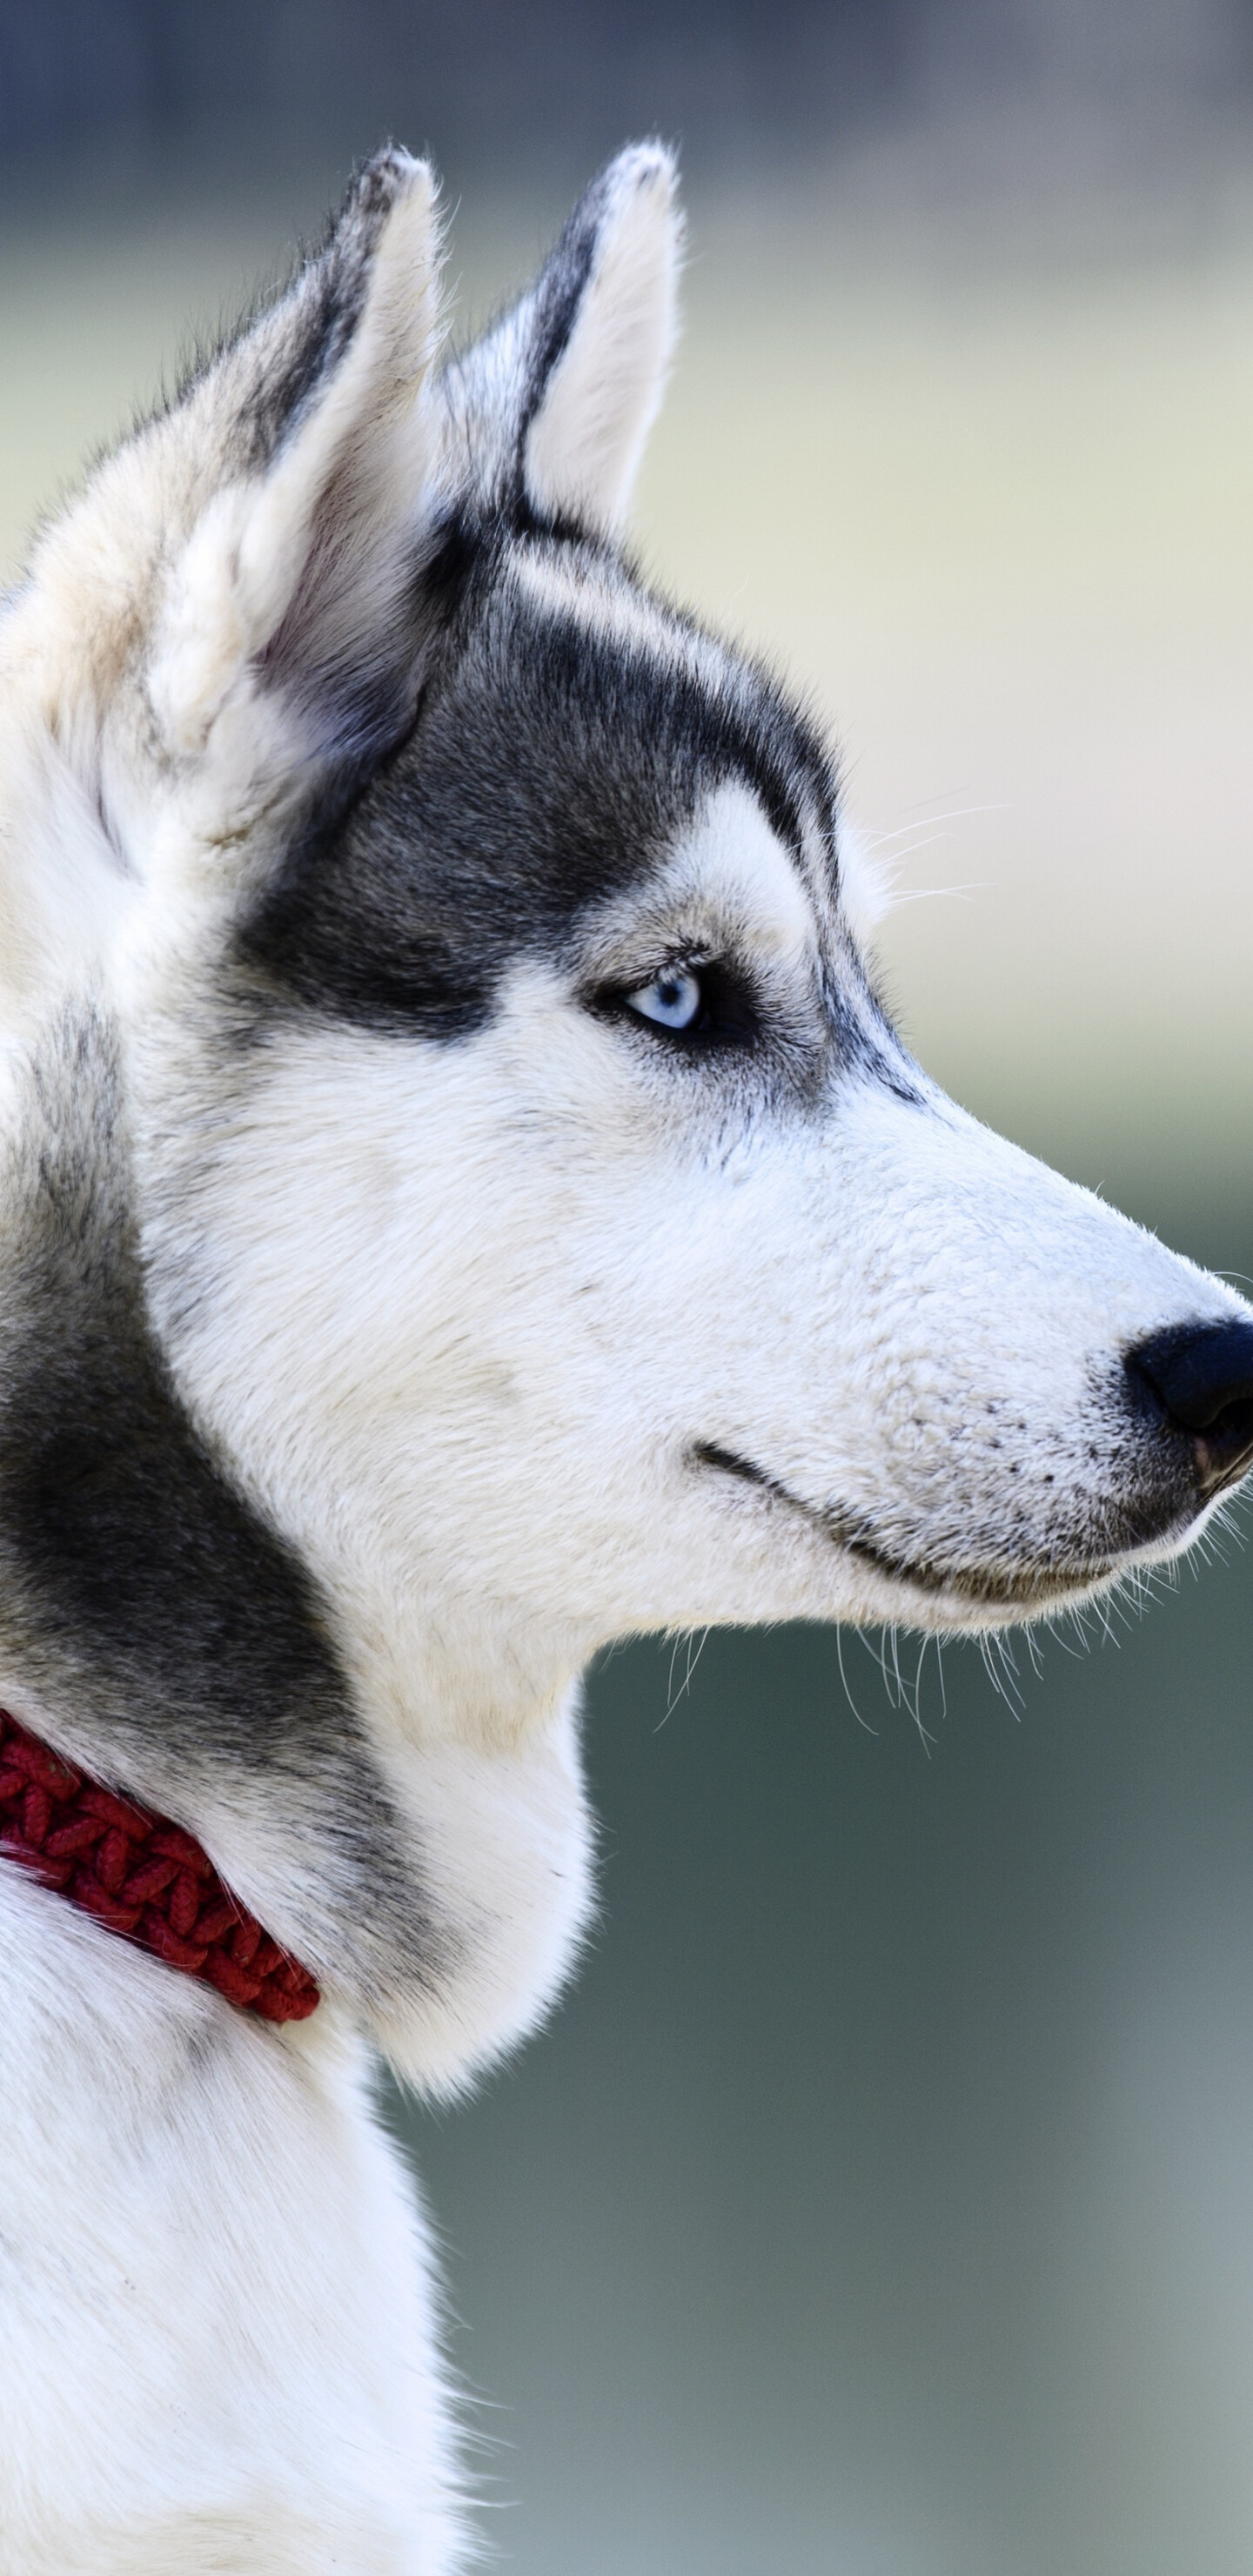 Dog: Husky, Used in the polar regions for work as sled dogs, Muzzle. 1440x2960 HD Wallpaper.